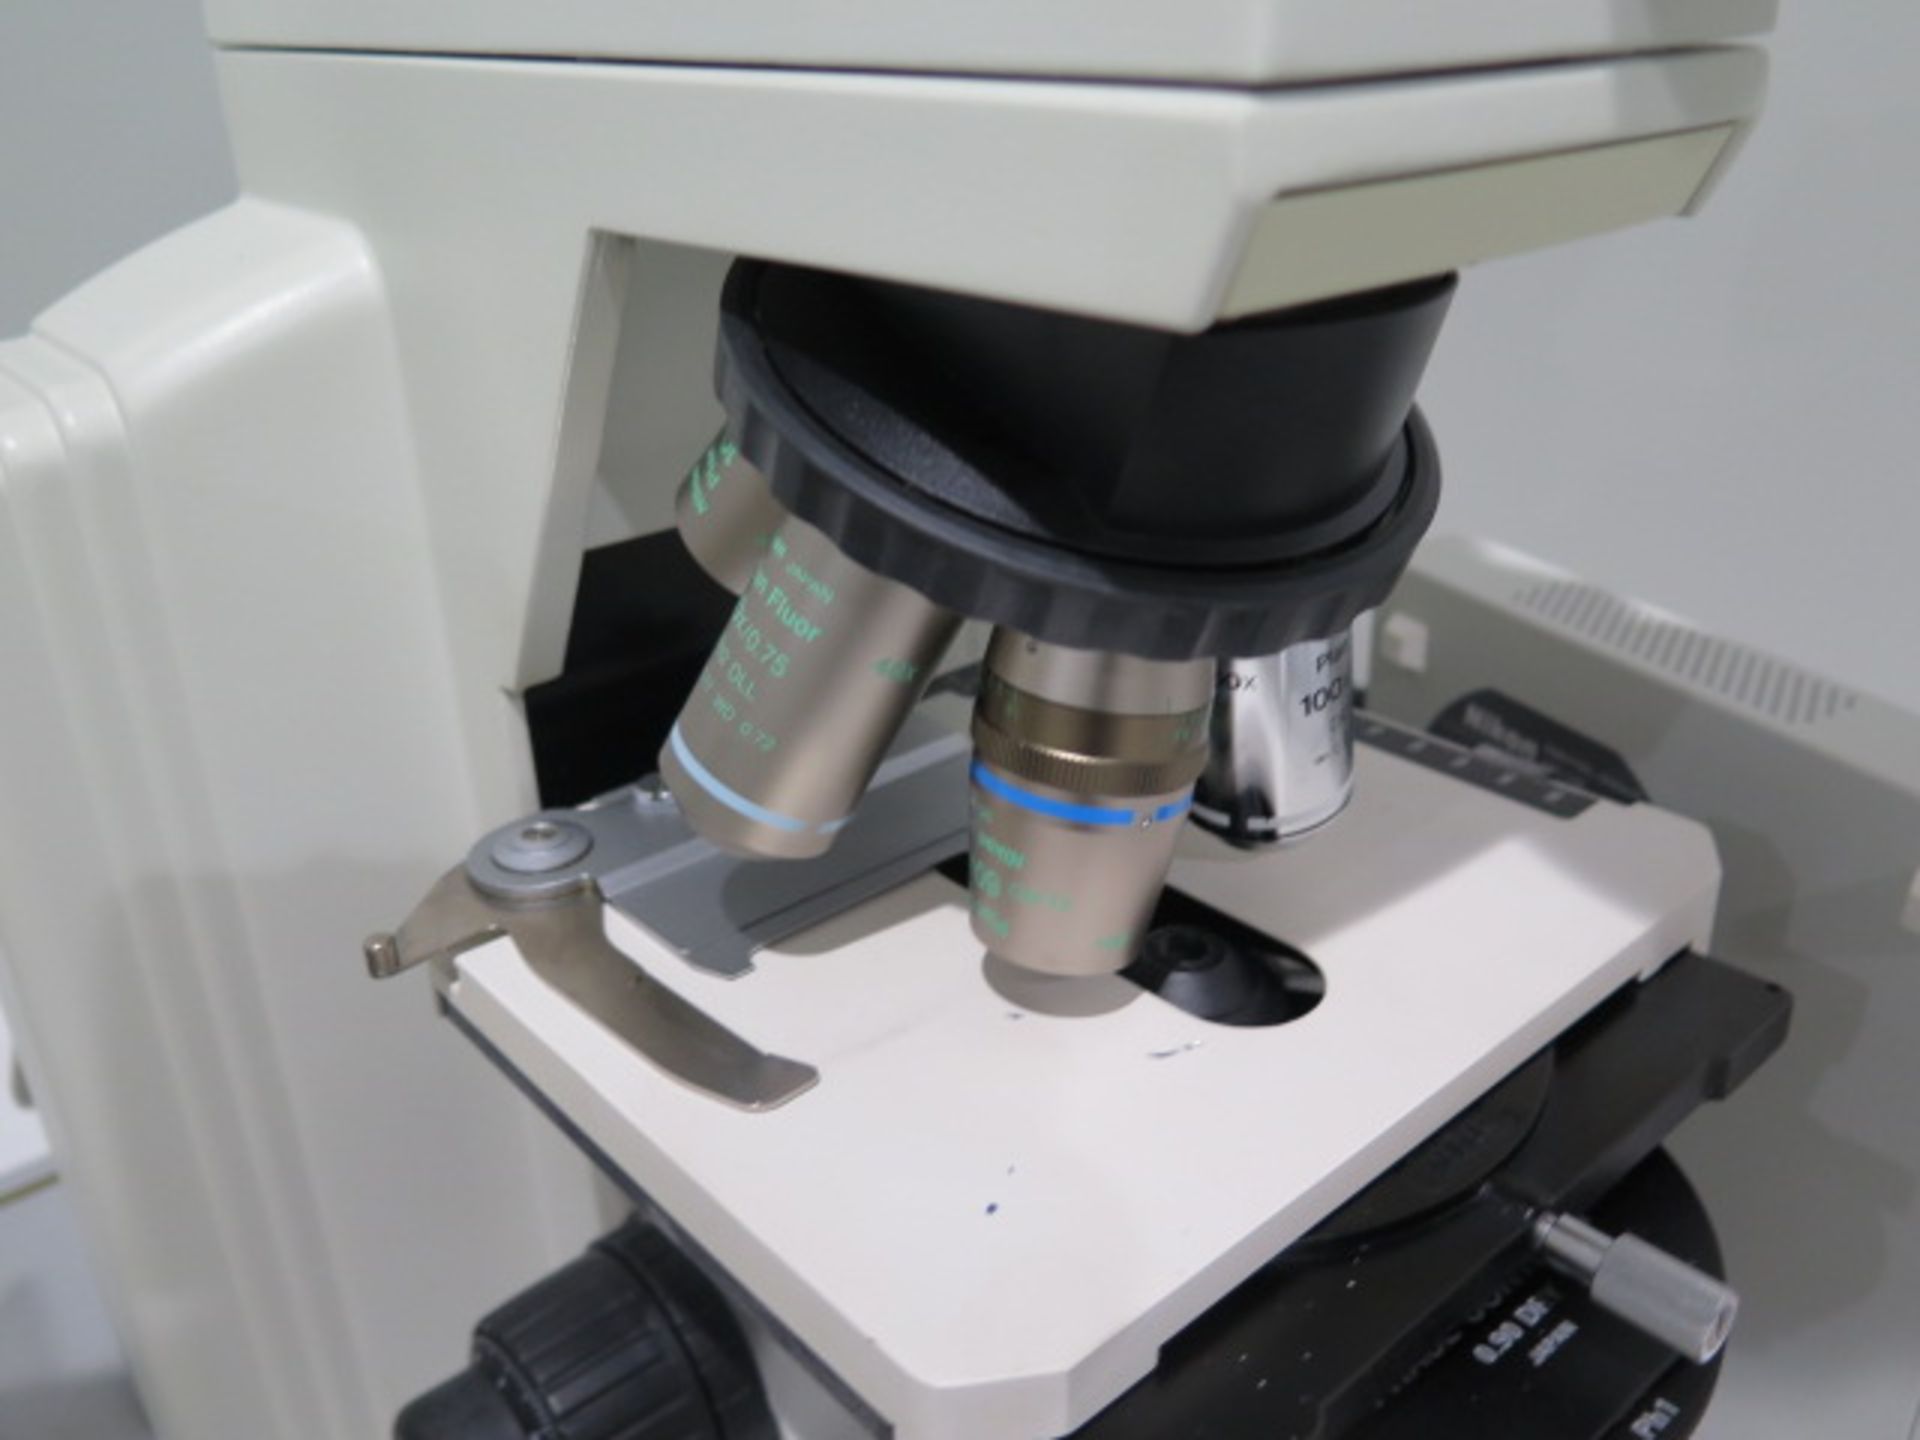 Nikon Eclipse E600 Research Microscope s/n 763673 w/ Nikon Light,DS-U2 Digital Sight Unit,SOLD AS IS - Image 4 of 15